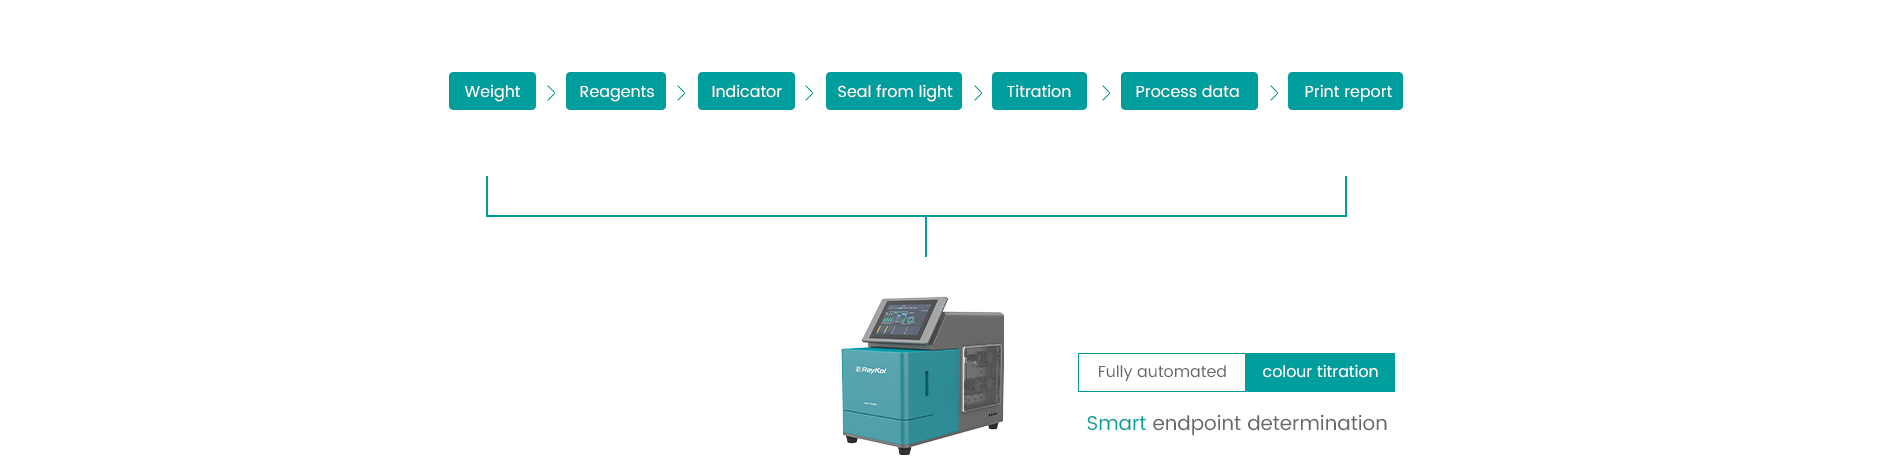 Analytical Laboratory Automated Solution